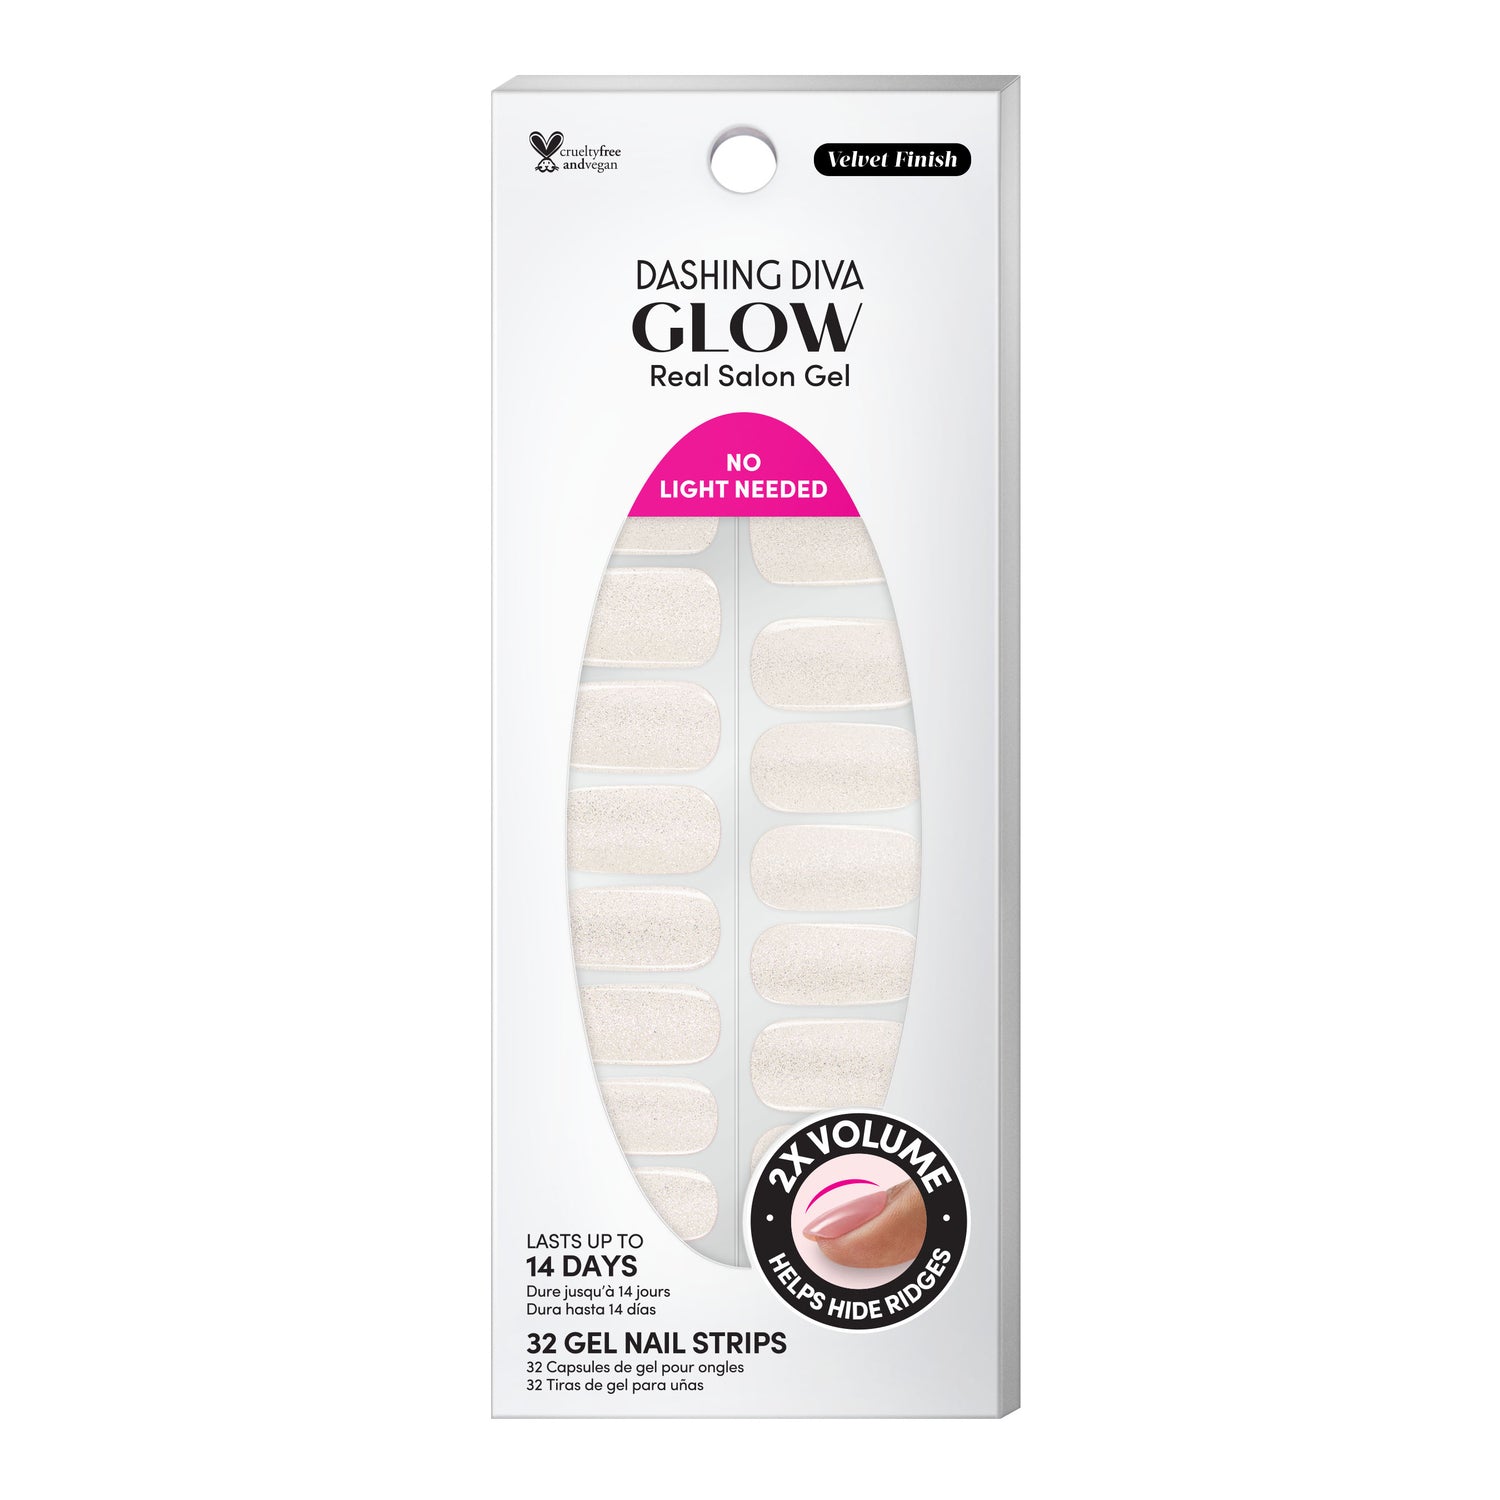 Light silver gel nail strips featuring velvet shimmer with a double gel formula for an ultra-smooth finish.